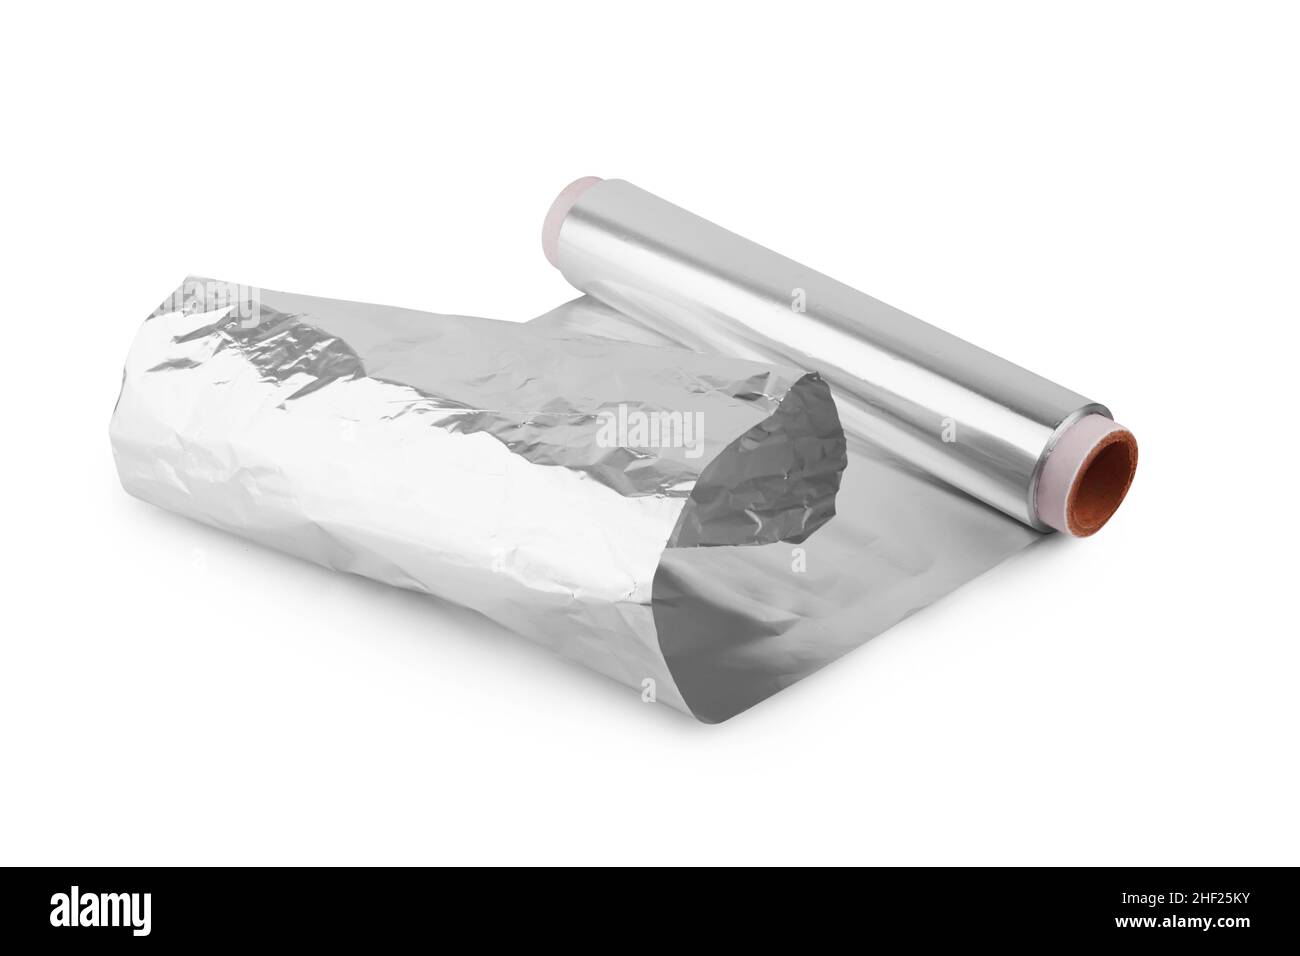 A roll of aluminum foil isolated on white background Stock Photo